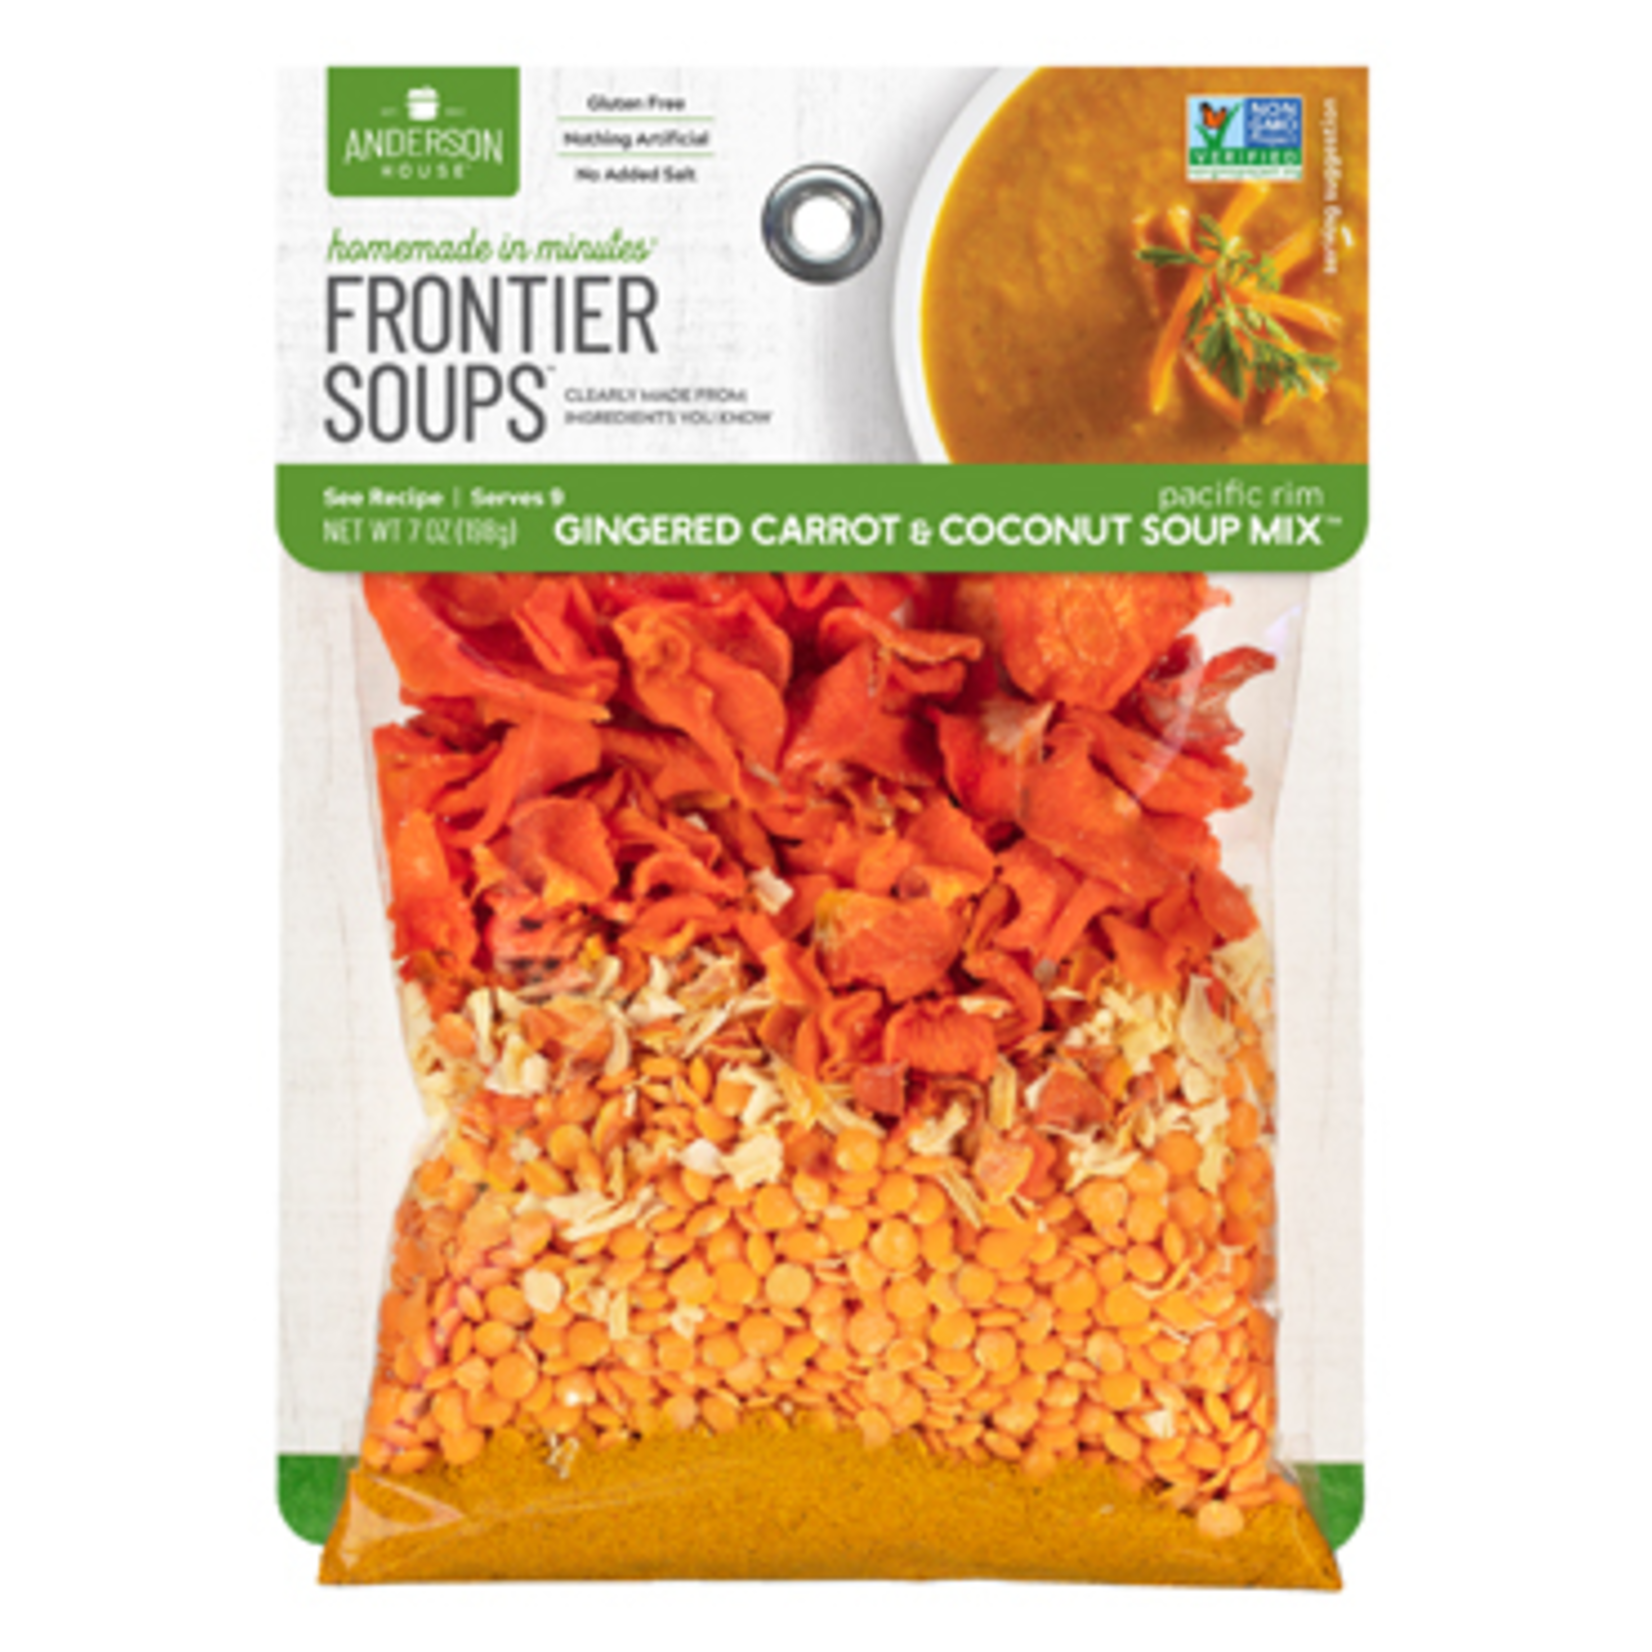 Frontier Soups Pacific Rim Gingered Carrot Soup Mix